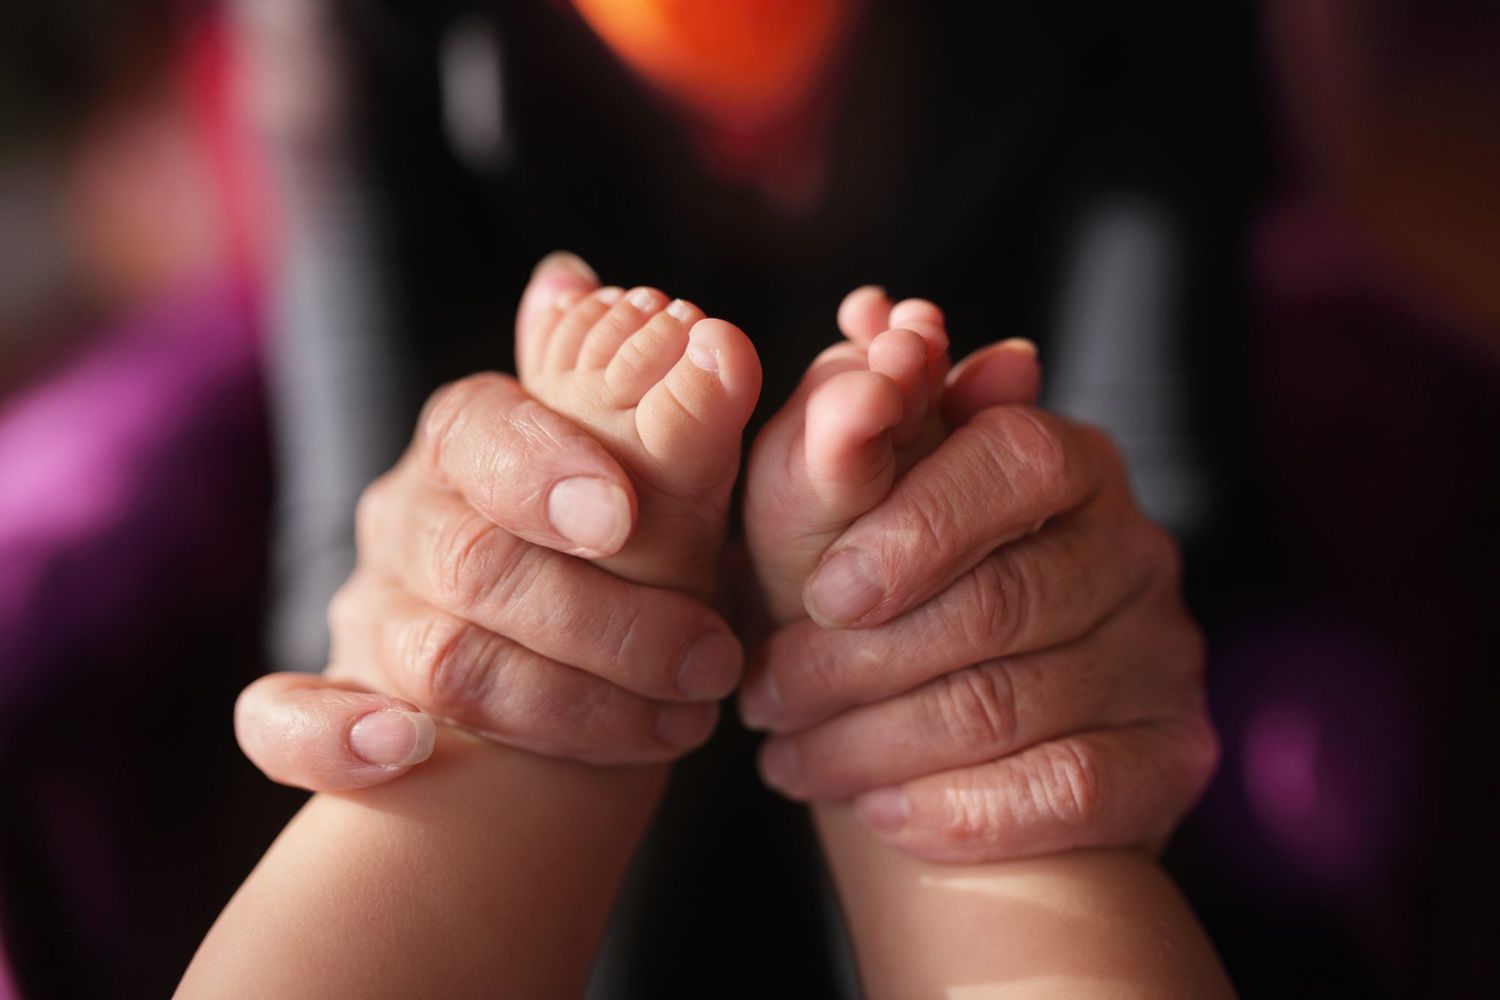 An image of the hands of a grandmother holding a newborn baby's feet.